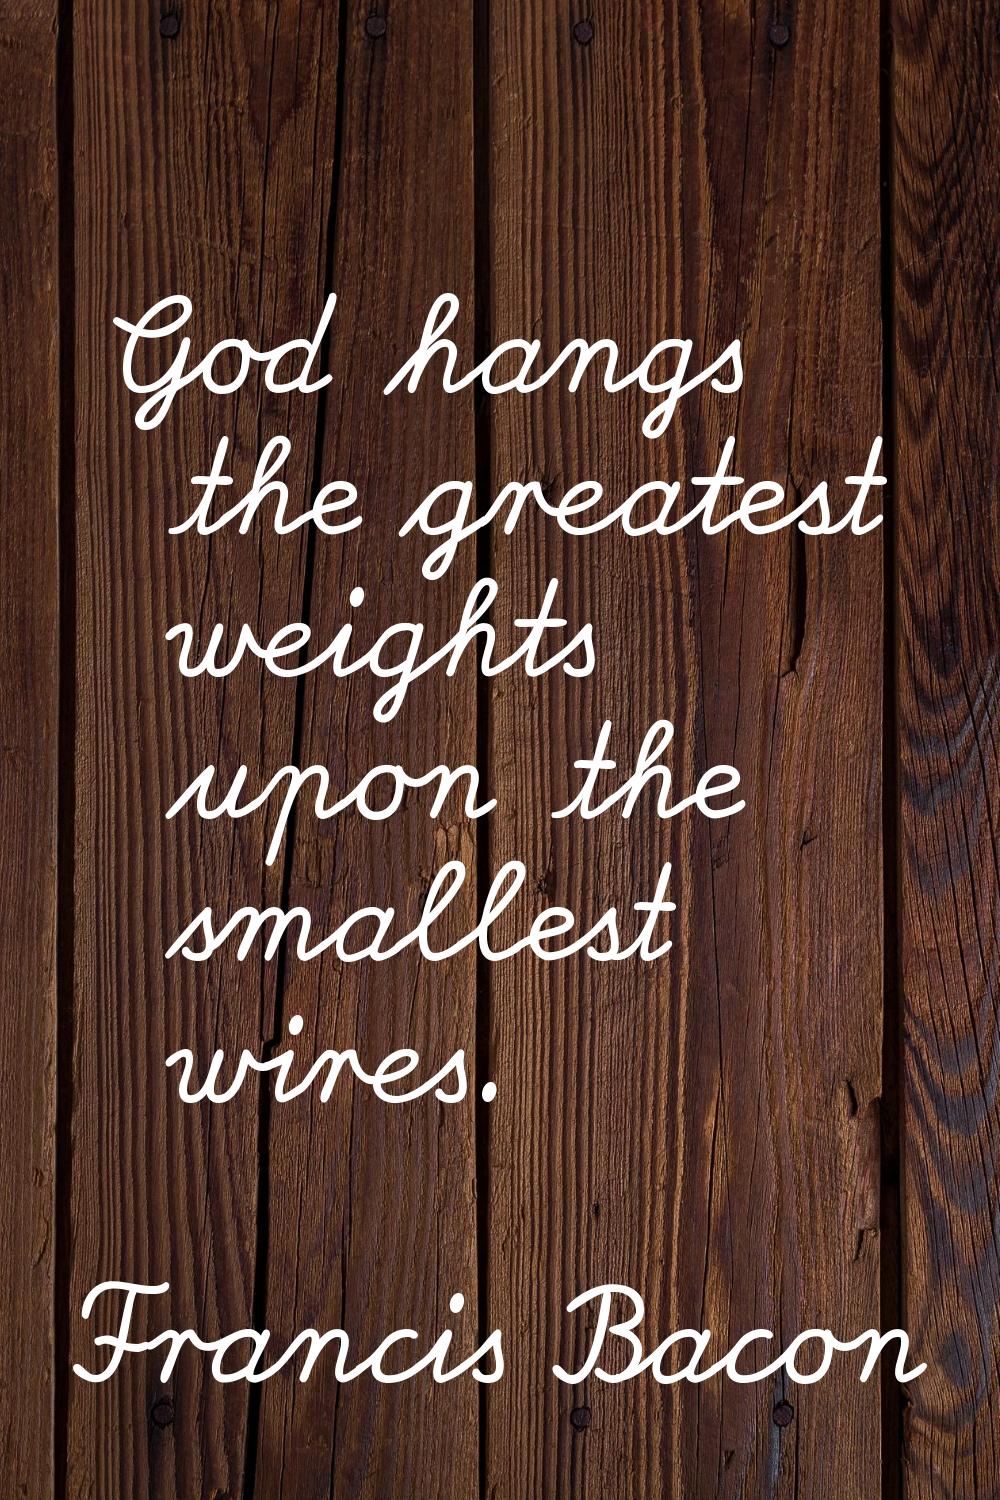 God hangs the greatest weights upon the smallest wires.